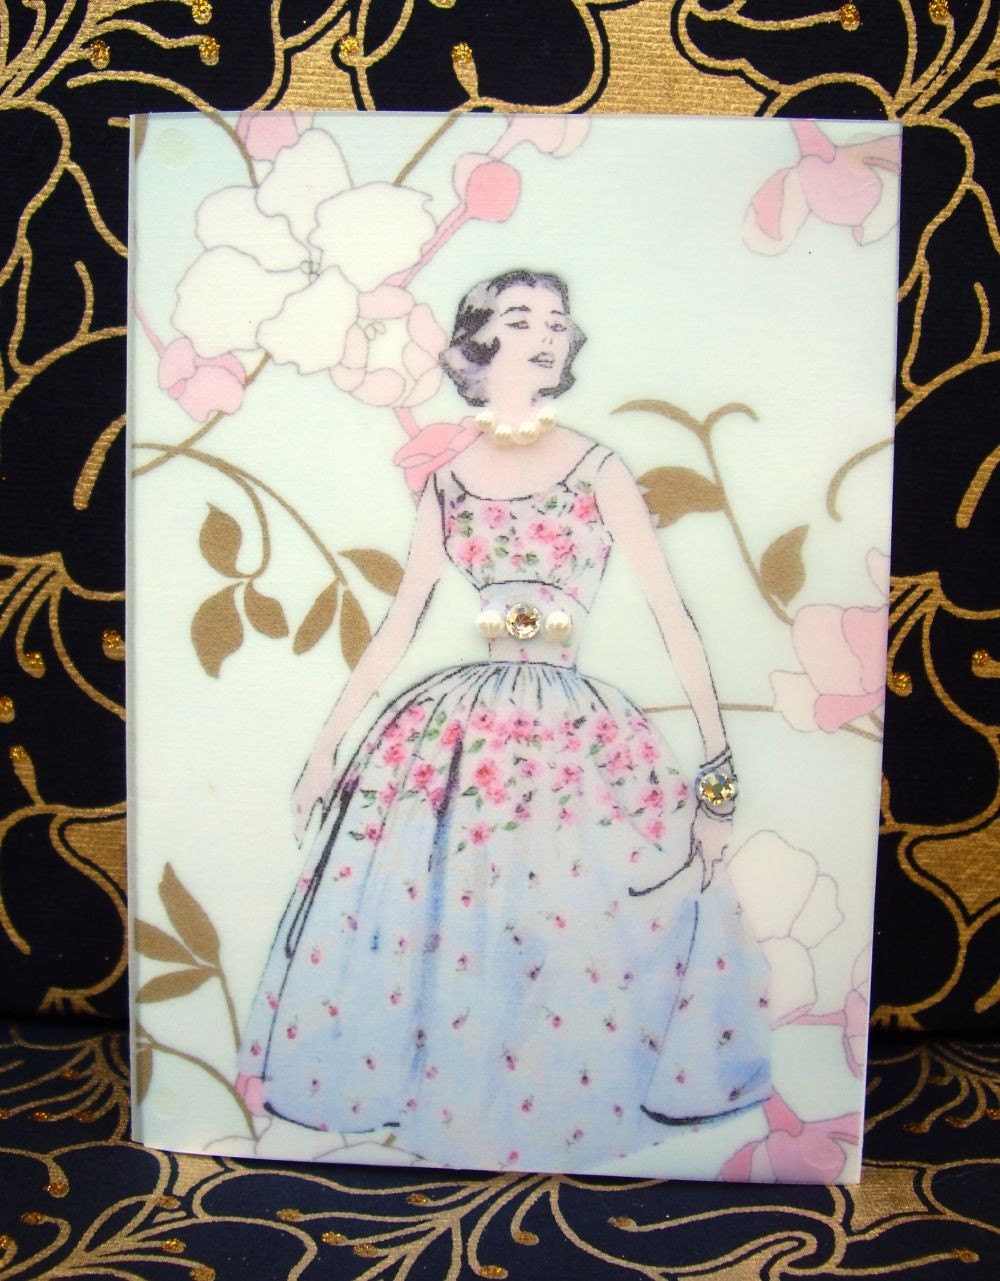 Peggy Card / Vintage Printed Collection / 50s Glamour Girl / Handmade Greeting Card